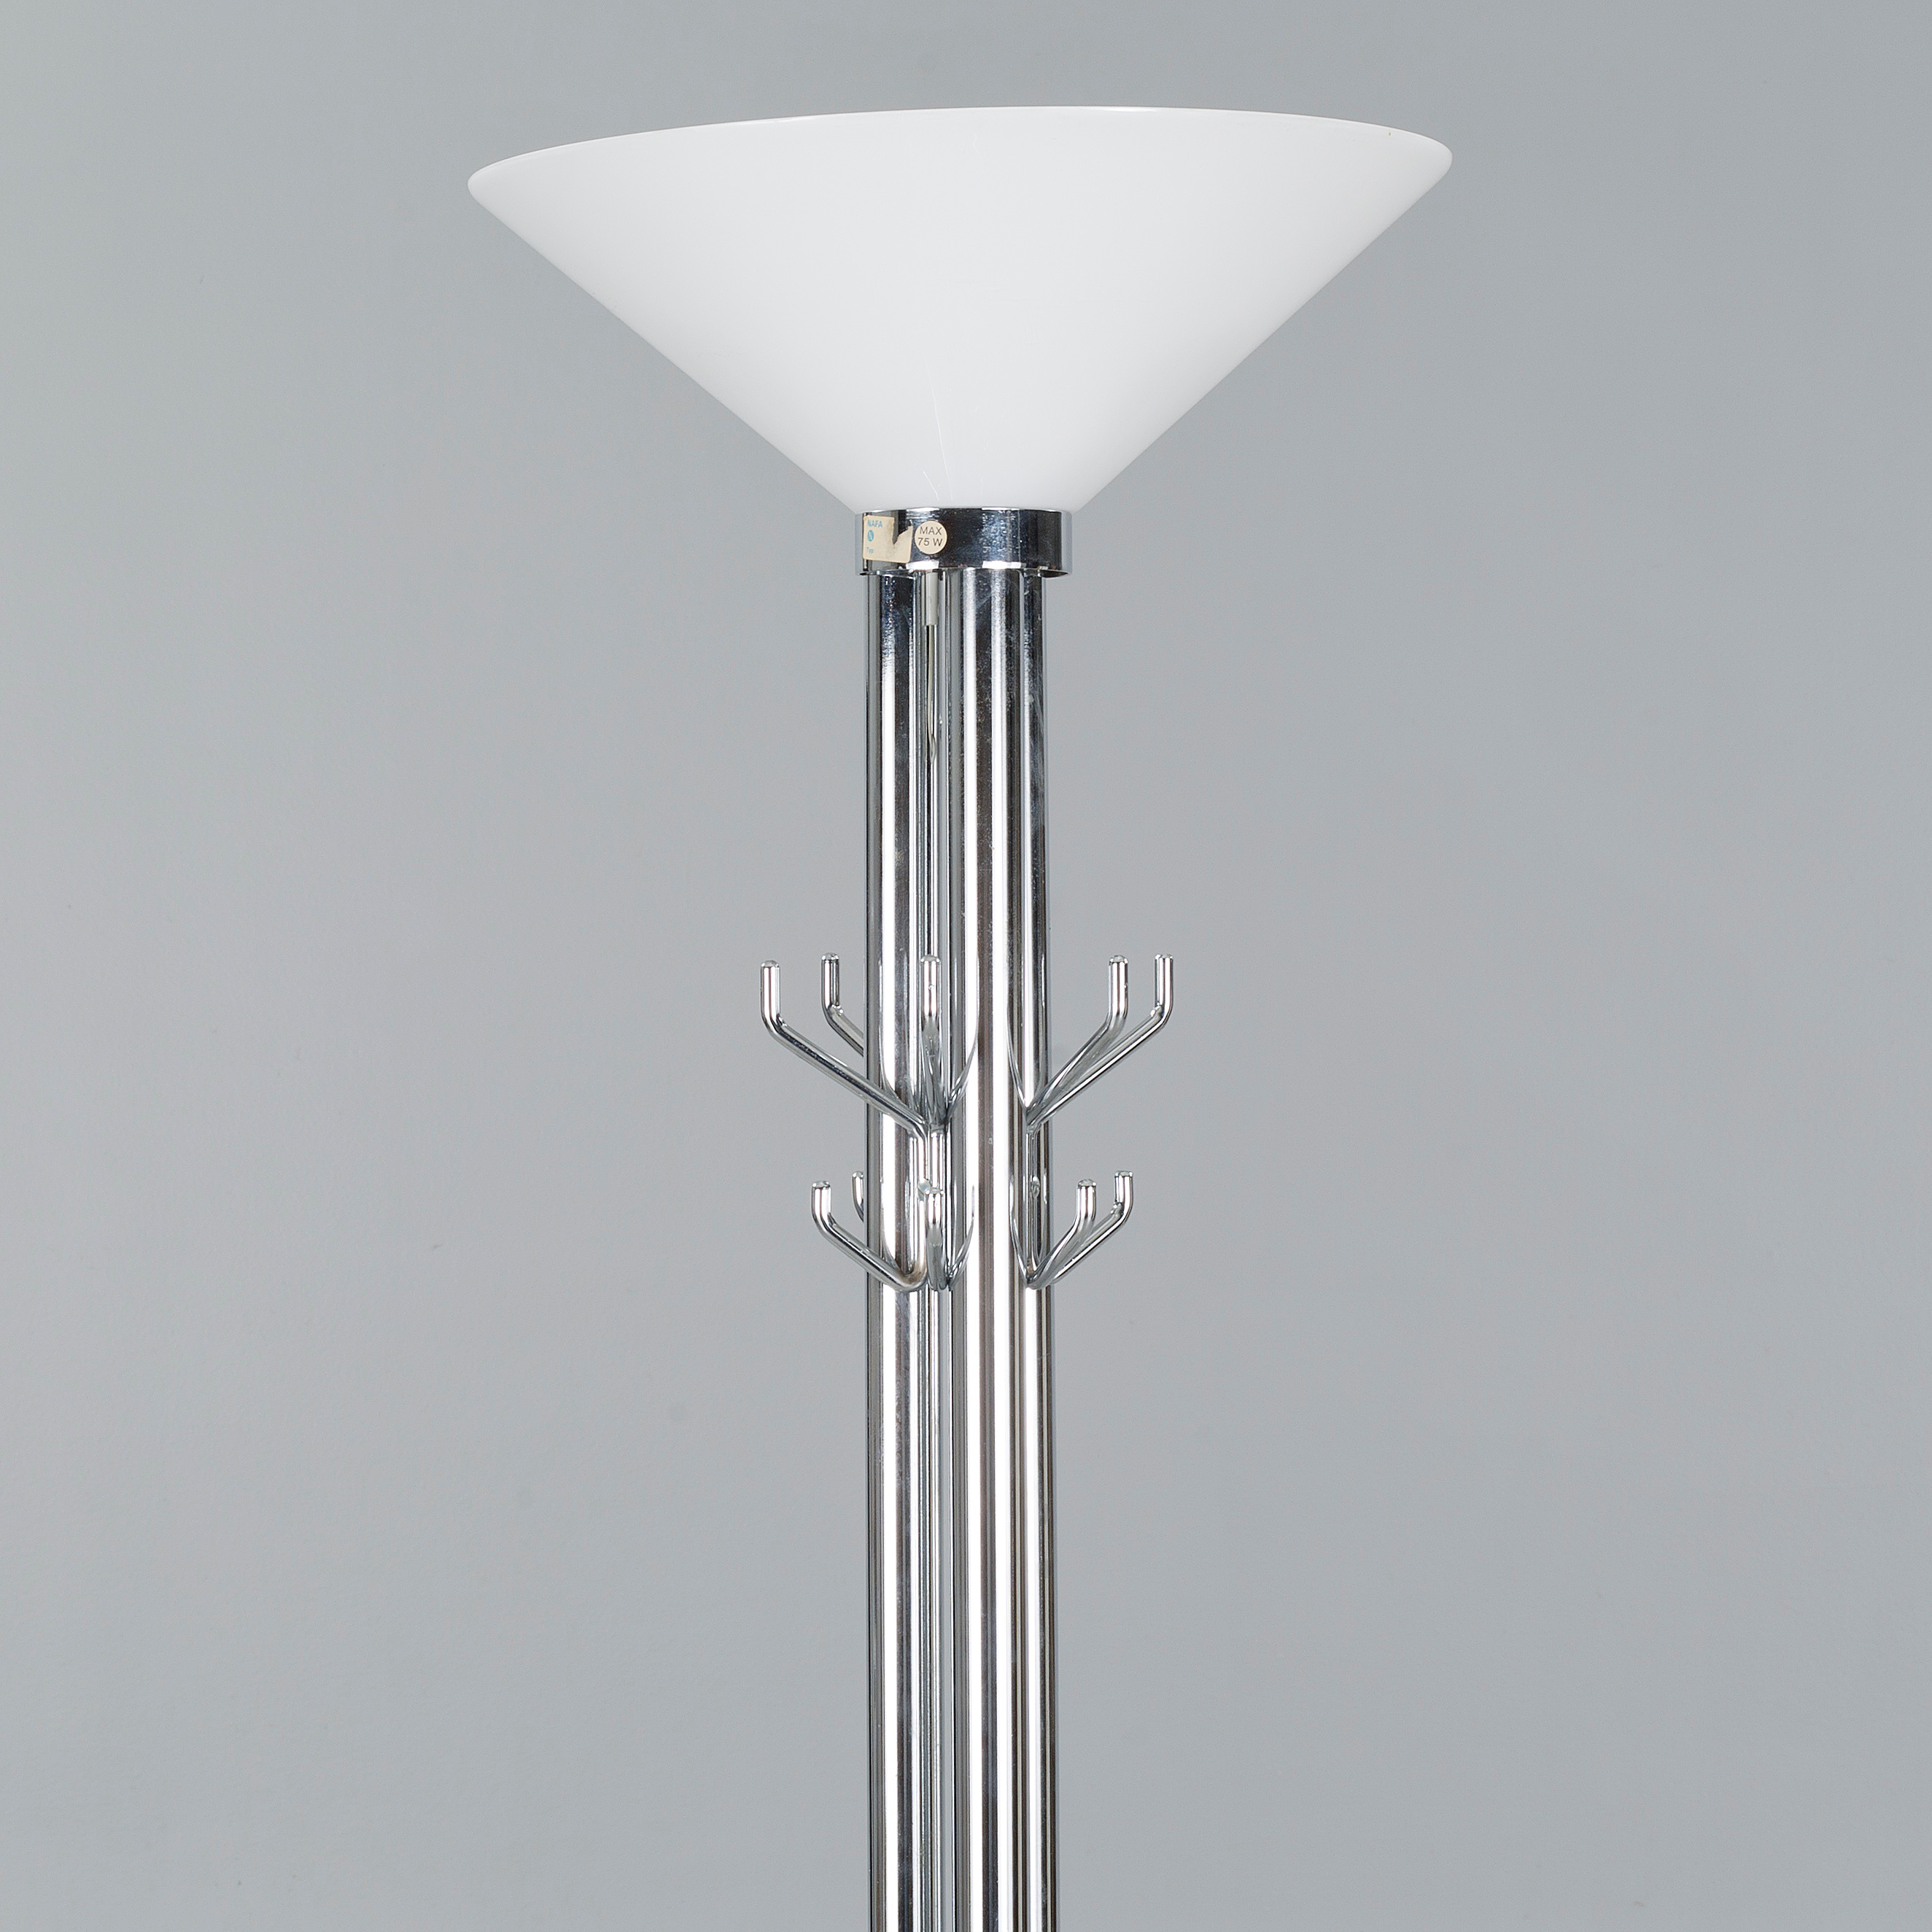 A Floor Lamp With Coat Hanger And Umberella Stand Nafa throughout sizing 2649 X 2649